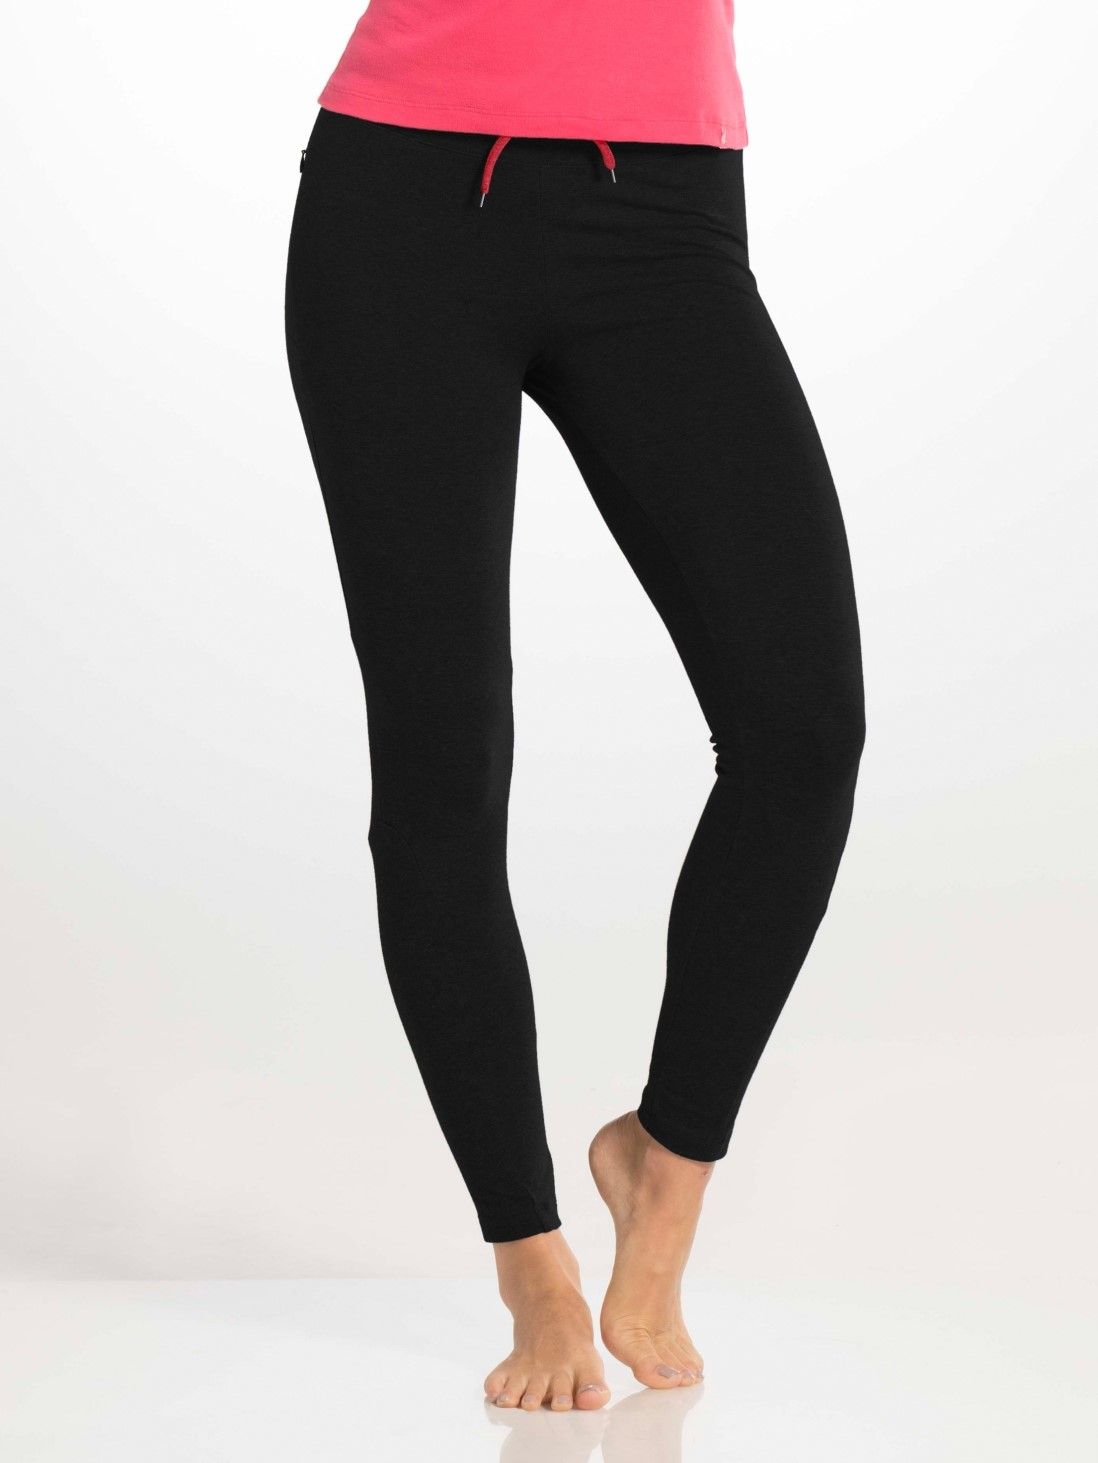 Jockey Yoga Pant Price Starting From Rs 863. Find Verified Sellers in  Hyderabad - JdMart